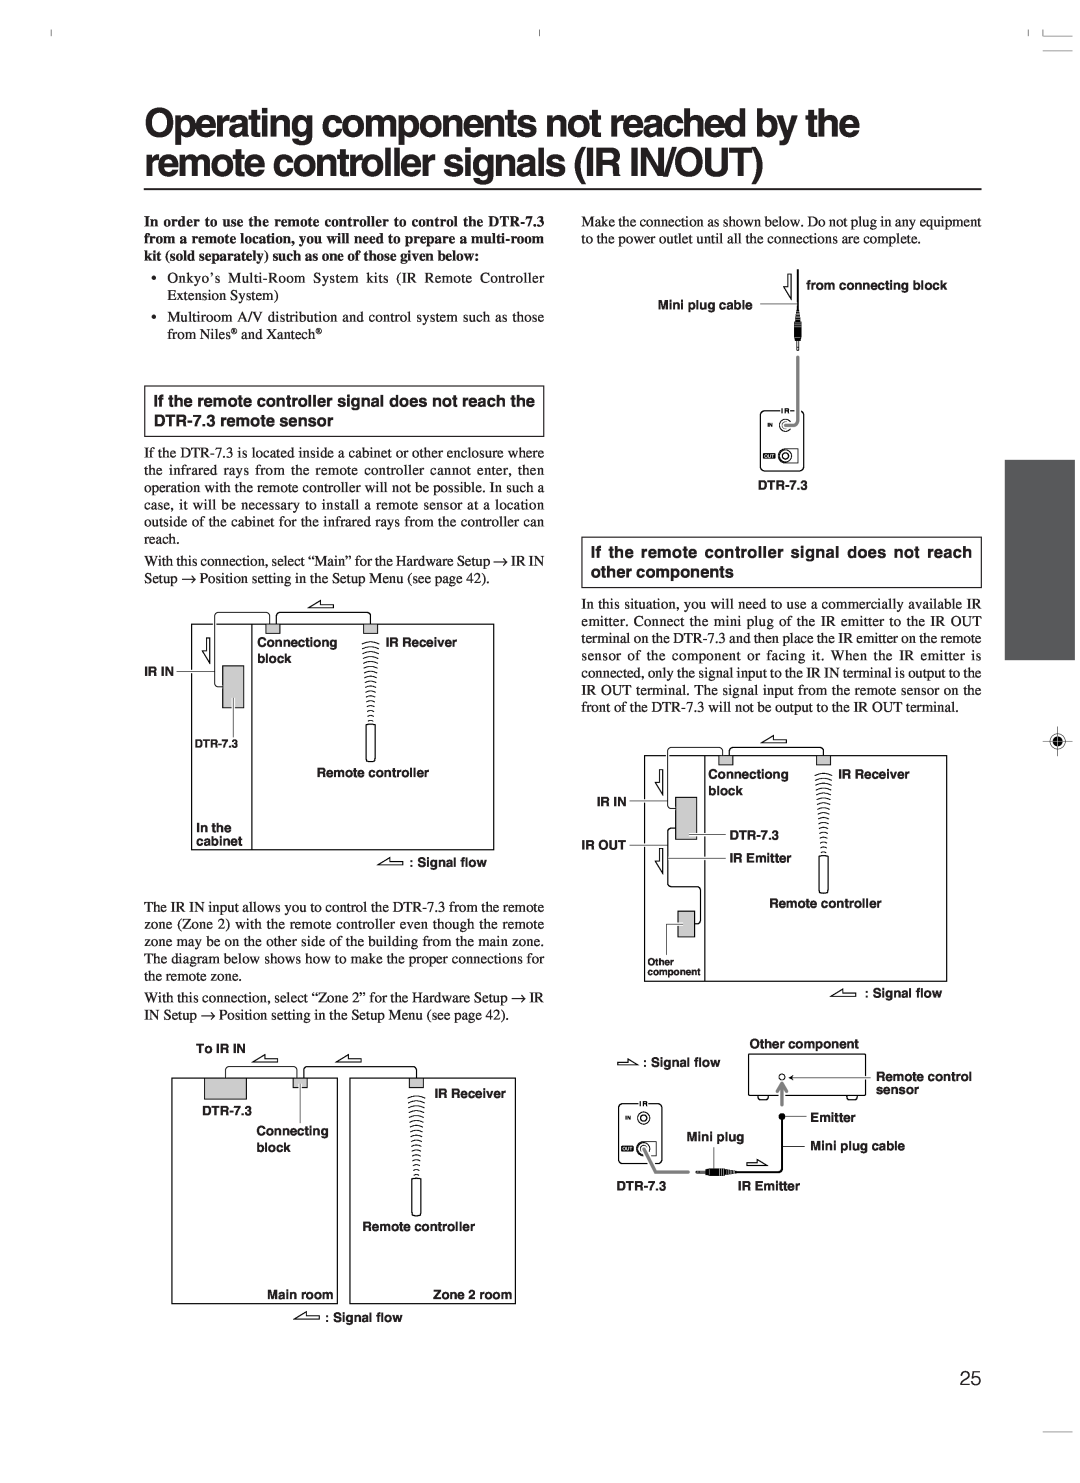 Integra DTR-7.3 instruction manual Connectiong 